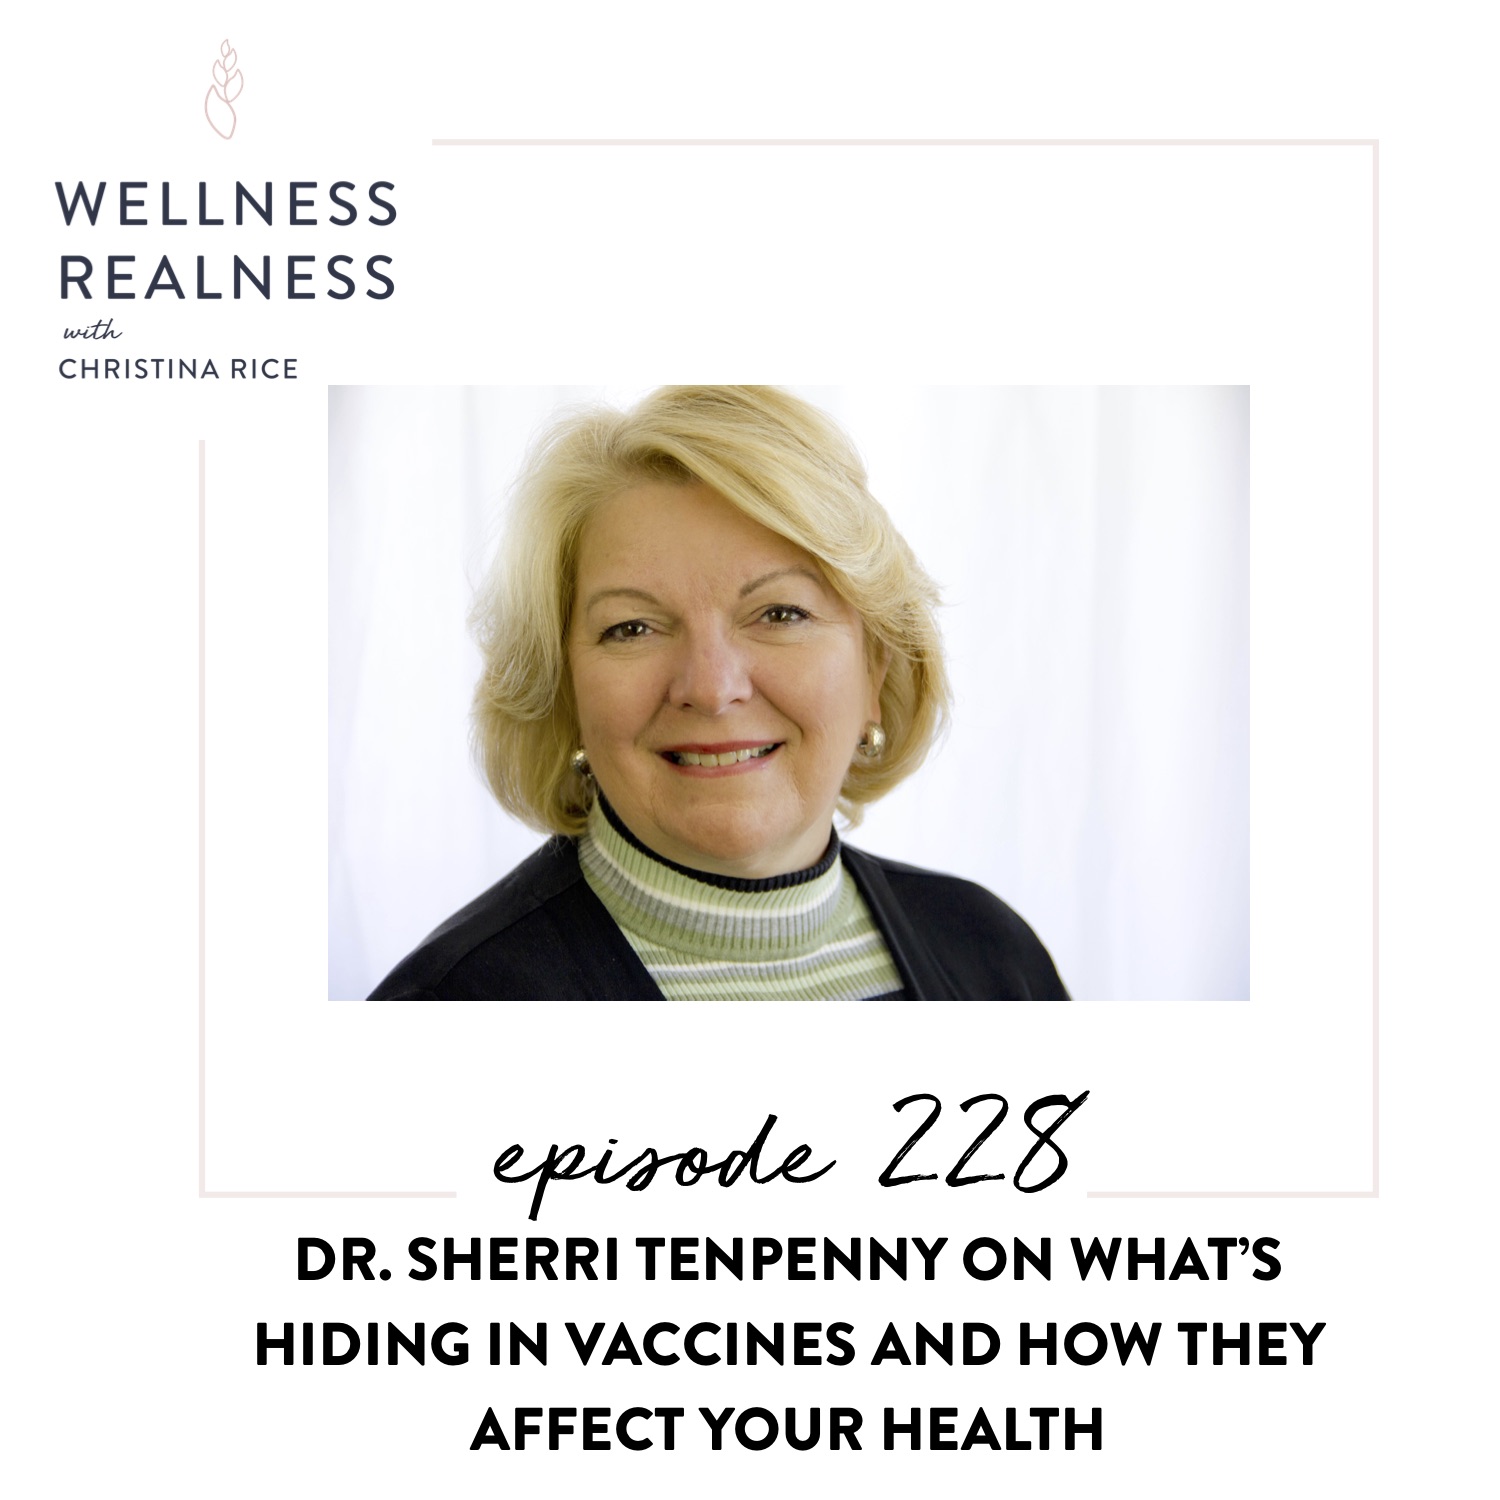 228: Dr. Sherri Tenpenny on What’s Hiding in Vaccines and How They Affect Your Health